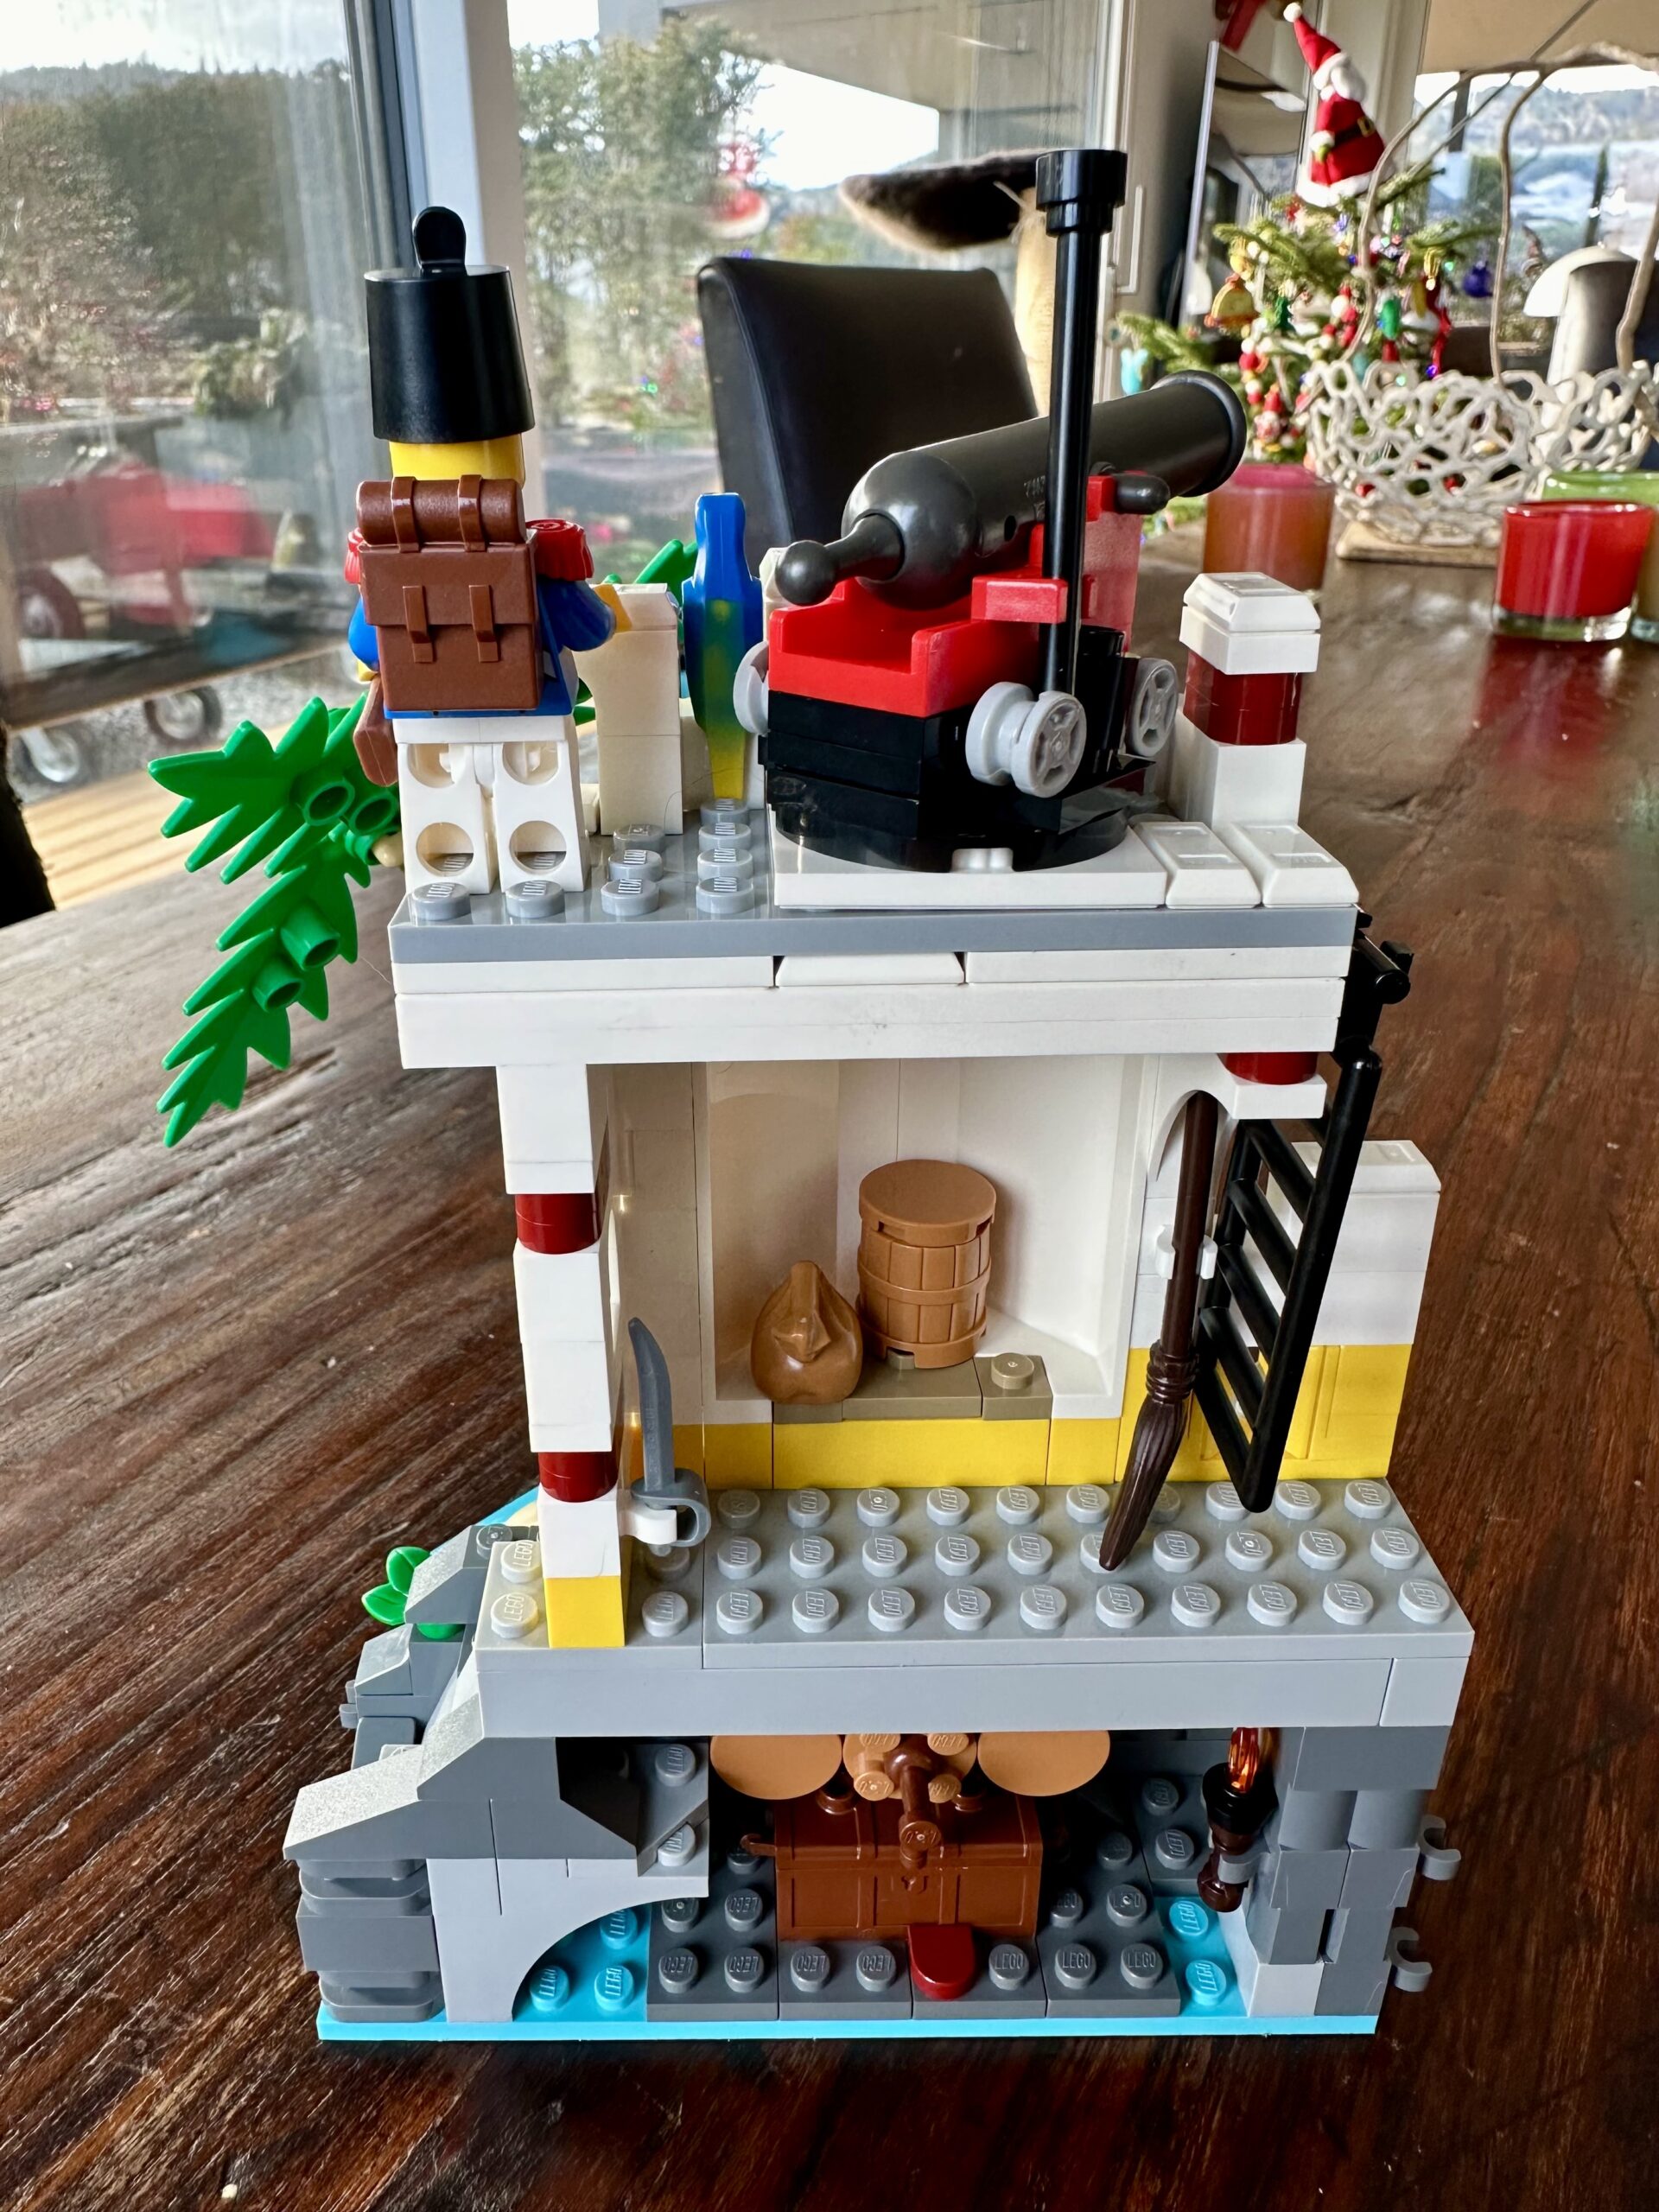 LEGO build of set 10320 Eldorado Fortress in progress. The rear side of a white tower revealing a seaside grotto with treasure chest and three kegs, a store room with weapons, barrel, and sack, and a roof with a cannon and an Imperial guard.